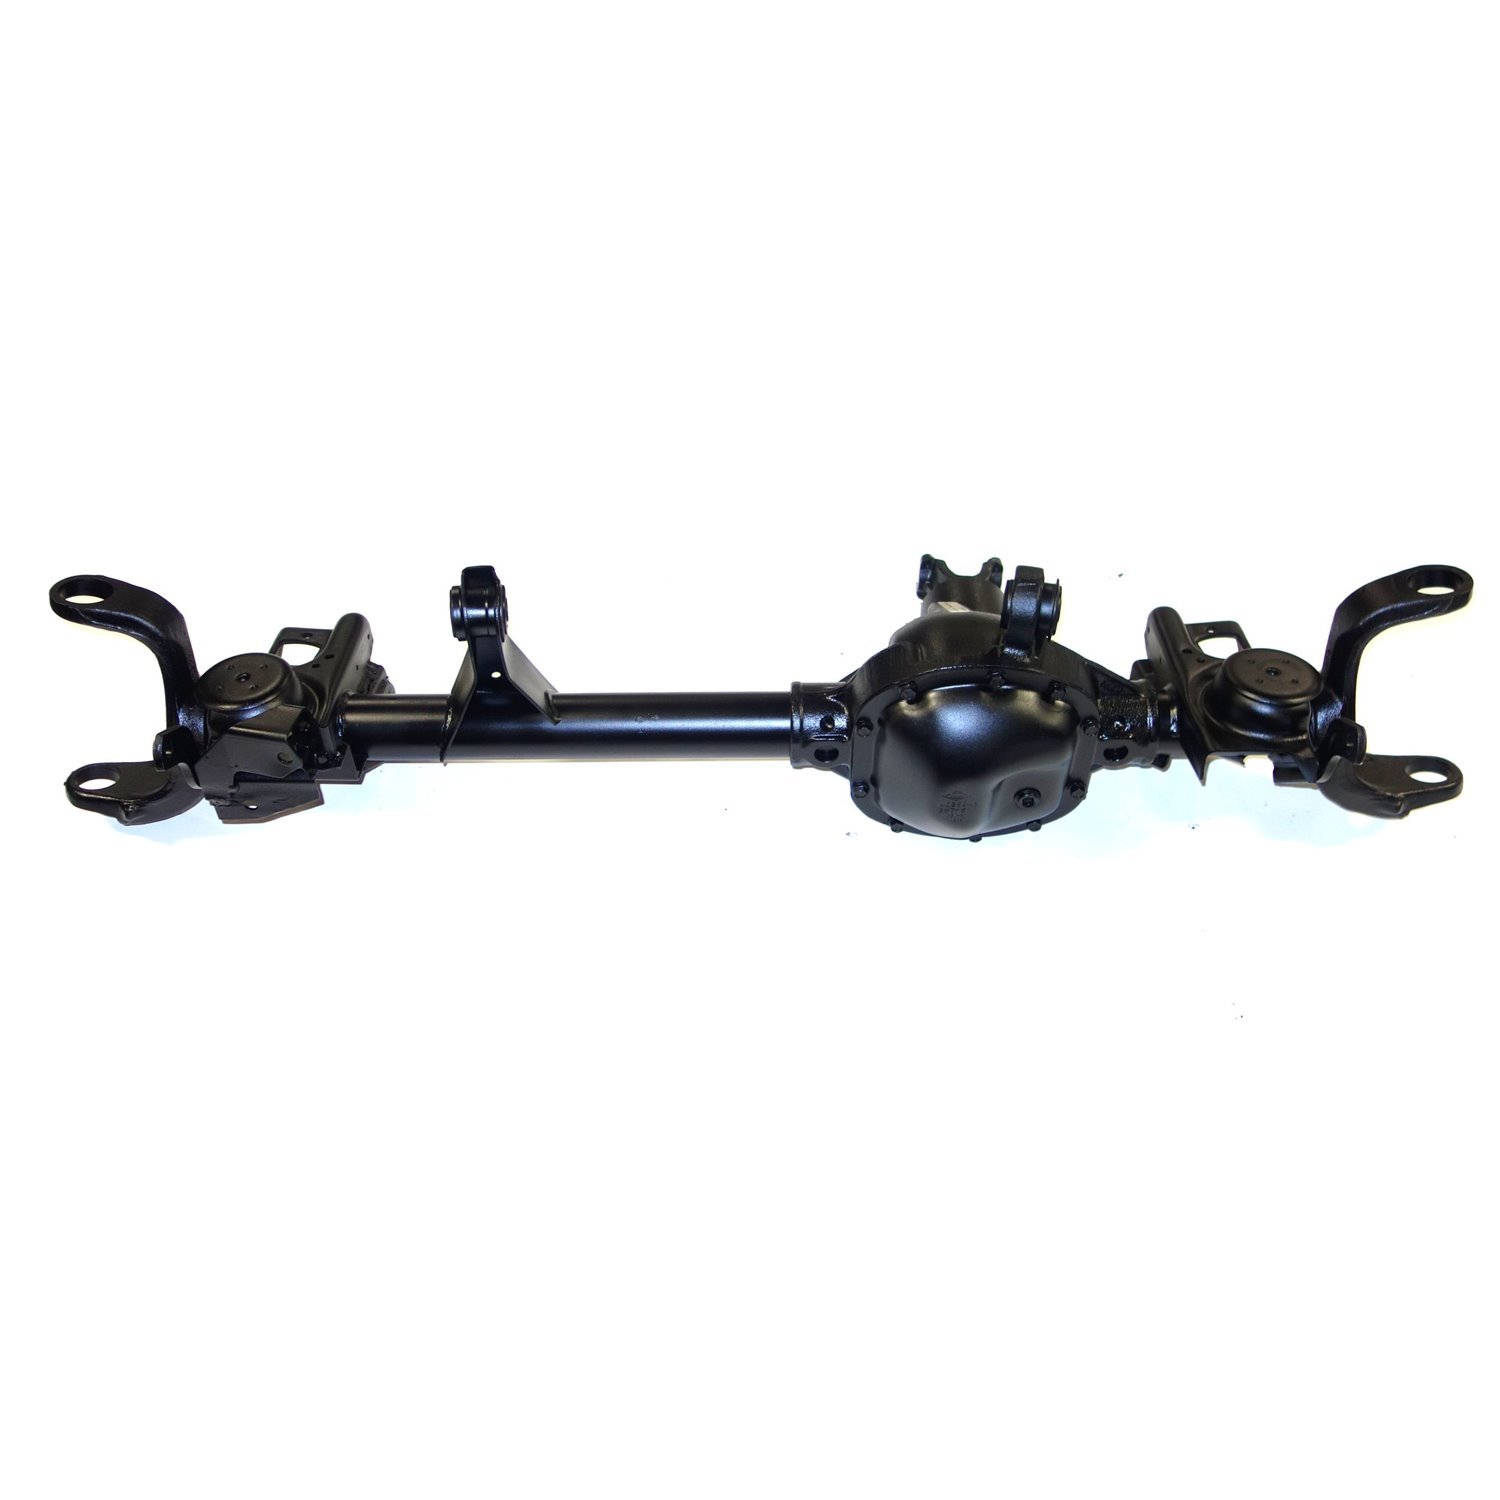 Remanufactured Complete Axle Assembly for Dana 30 97-05 Jeep Wrangler 3.73 Ratio, ABS